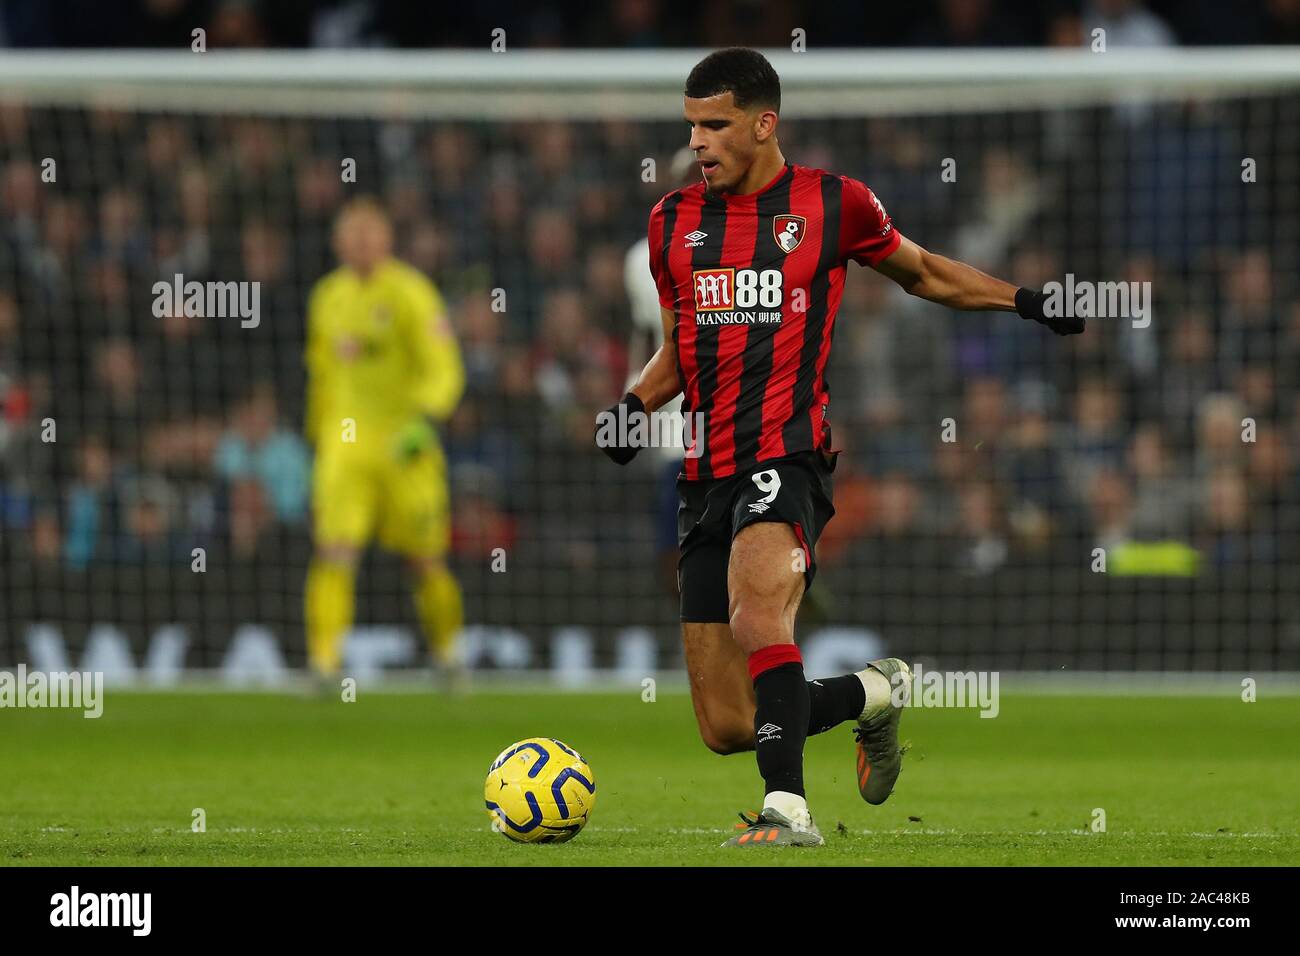 Bournemouth's forward Dominic Solanke during the Barclays Premier League match between Tottenham Hotspur and Bournemouth at the Tottenham Hotspur Stadium, London, England. On the 30th November 2019. (Photo by AFS/Espa-Images) Stock Photo